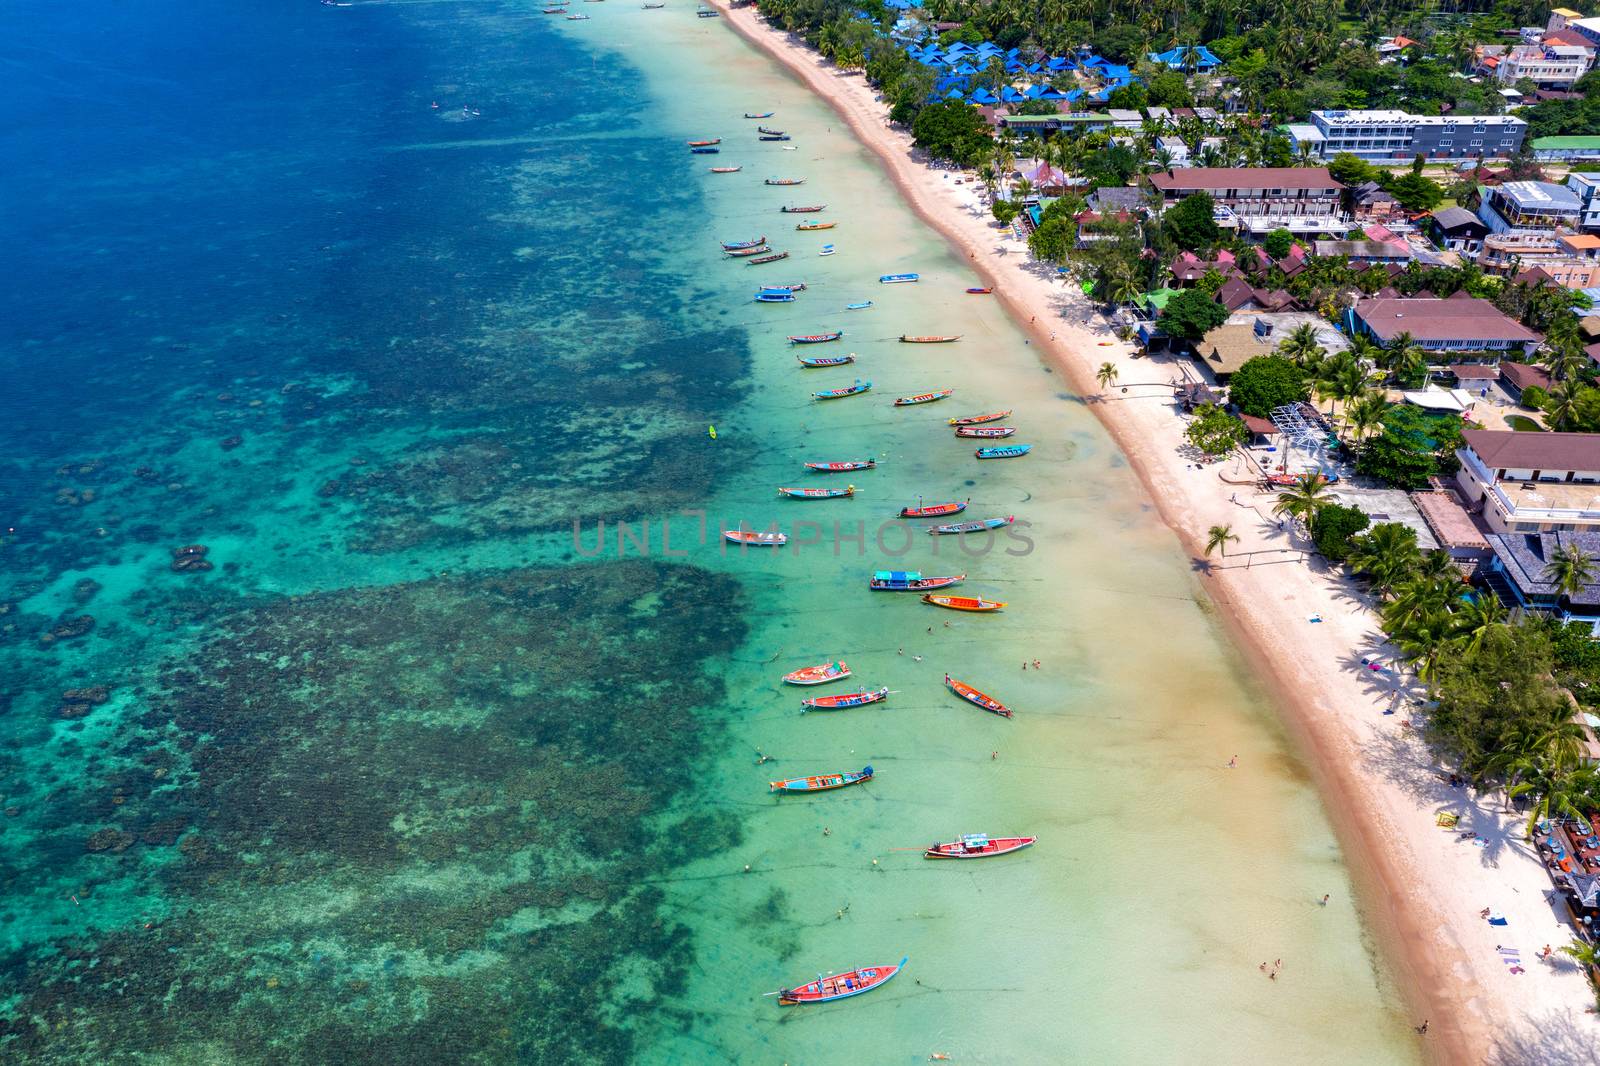 Aerial view of Long tail boats on the sea at Koh Tao island, Thailand. by gutarphotoghaphy